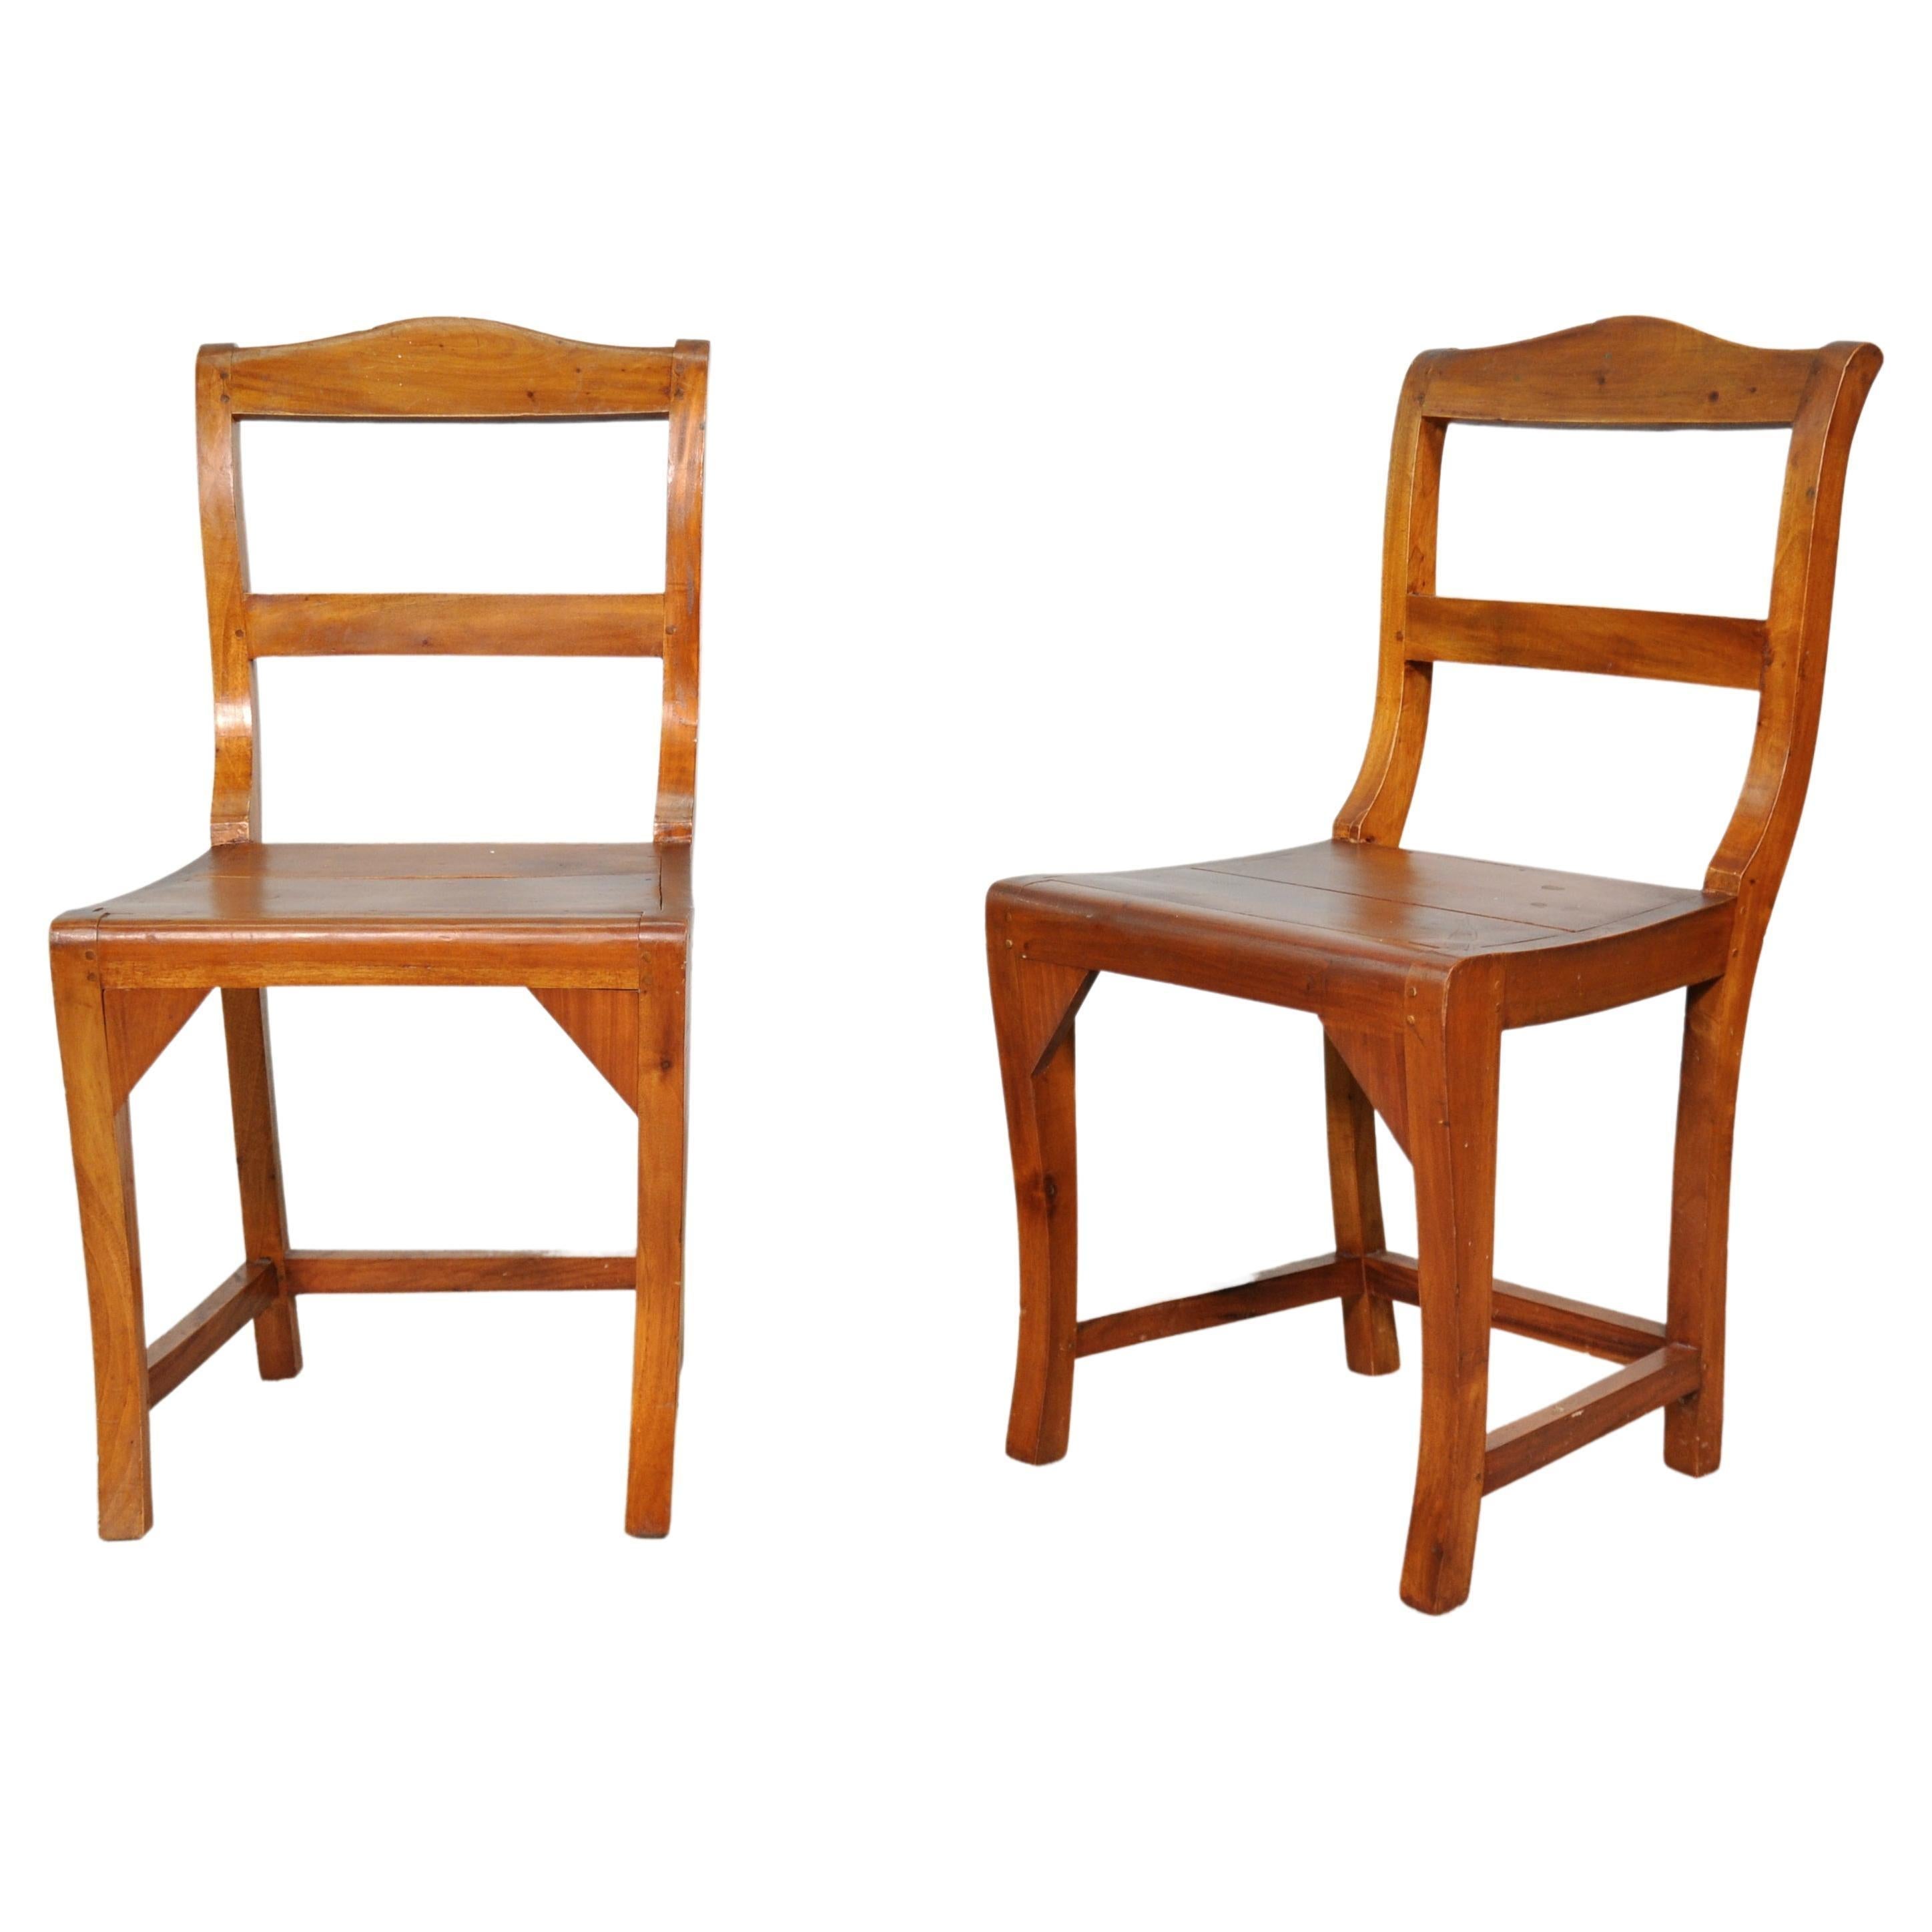 19th Century French Country Rustic Side Chairs - a Pair For Sale